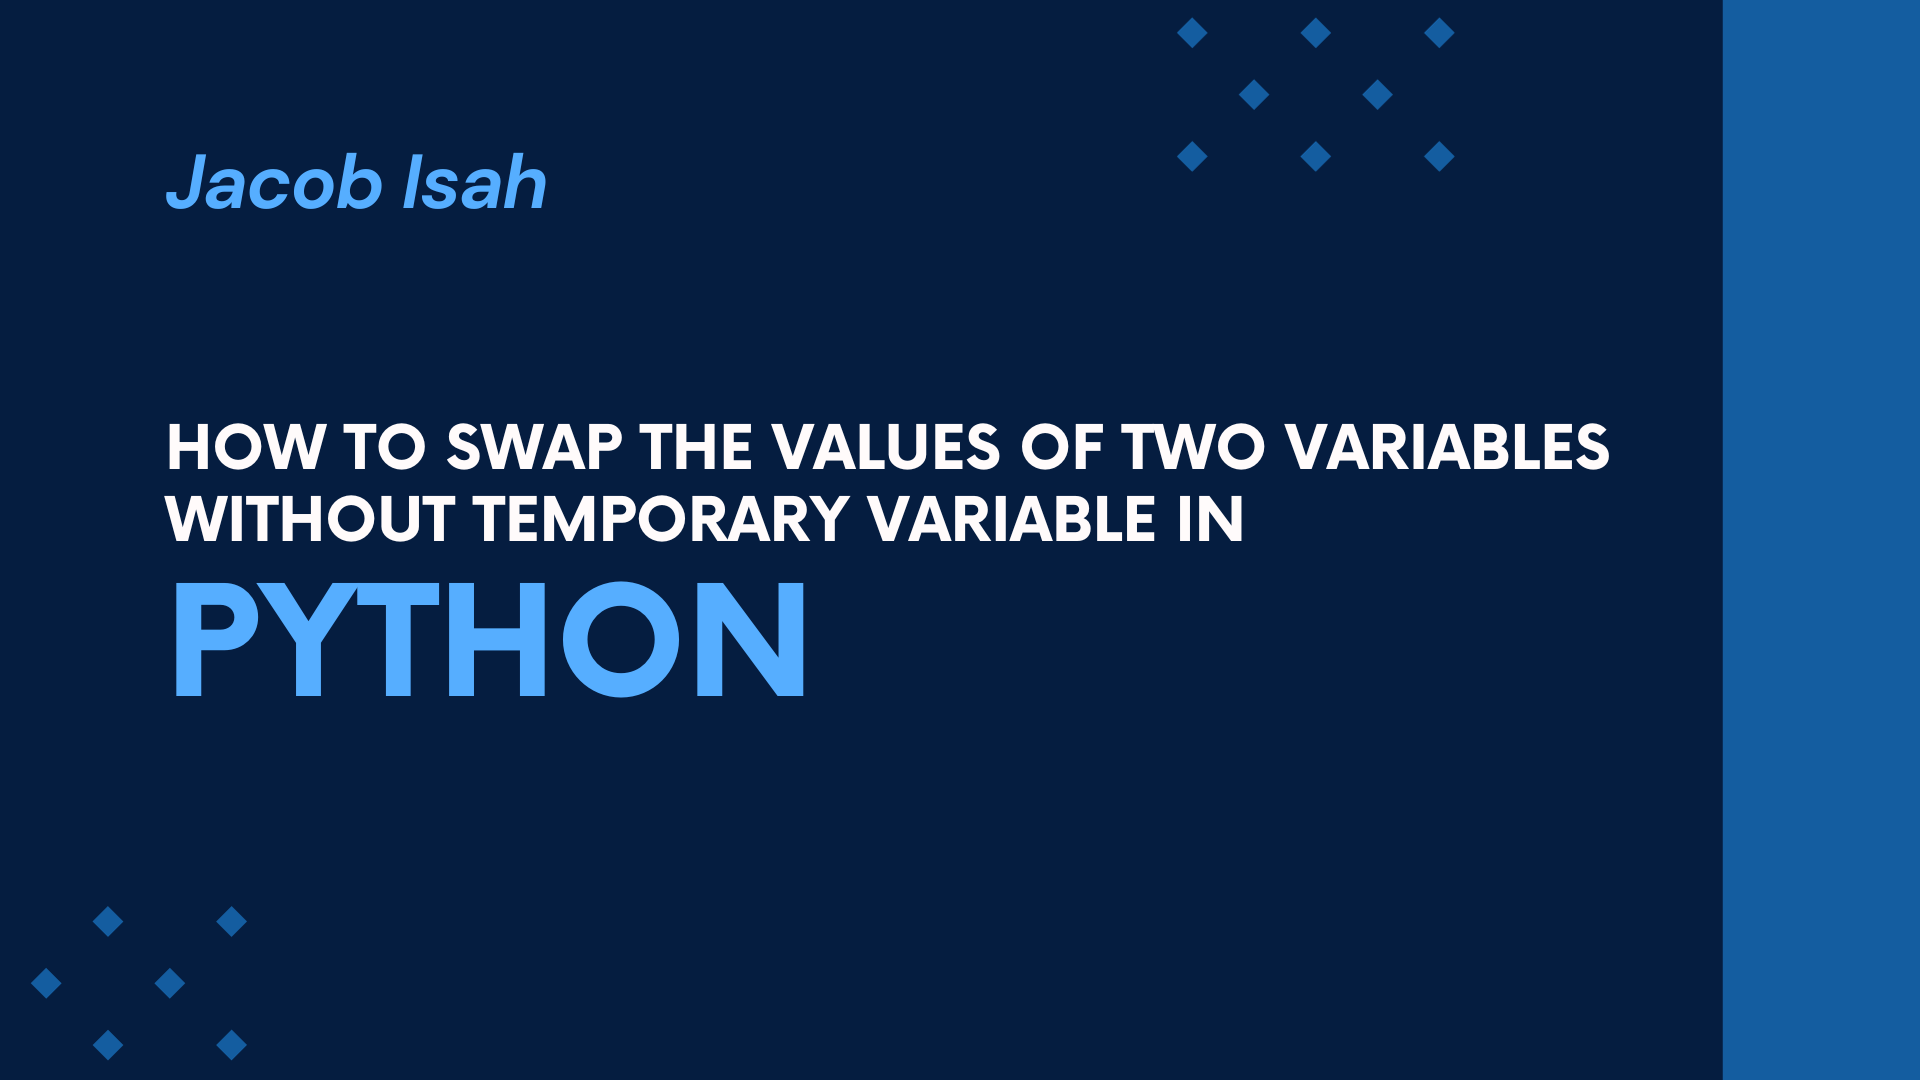 Image for How to Swap the Values of Two Variables Without a Temporary Variable in Python